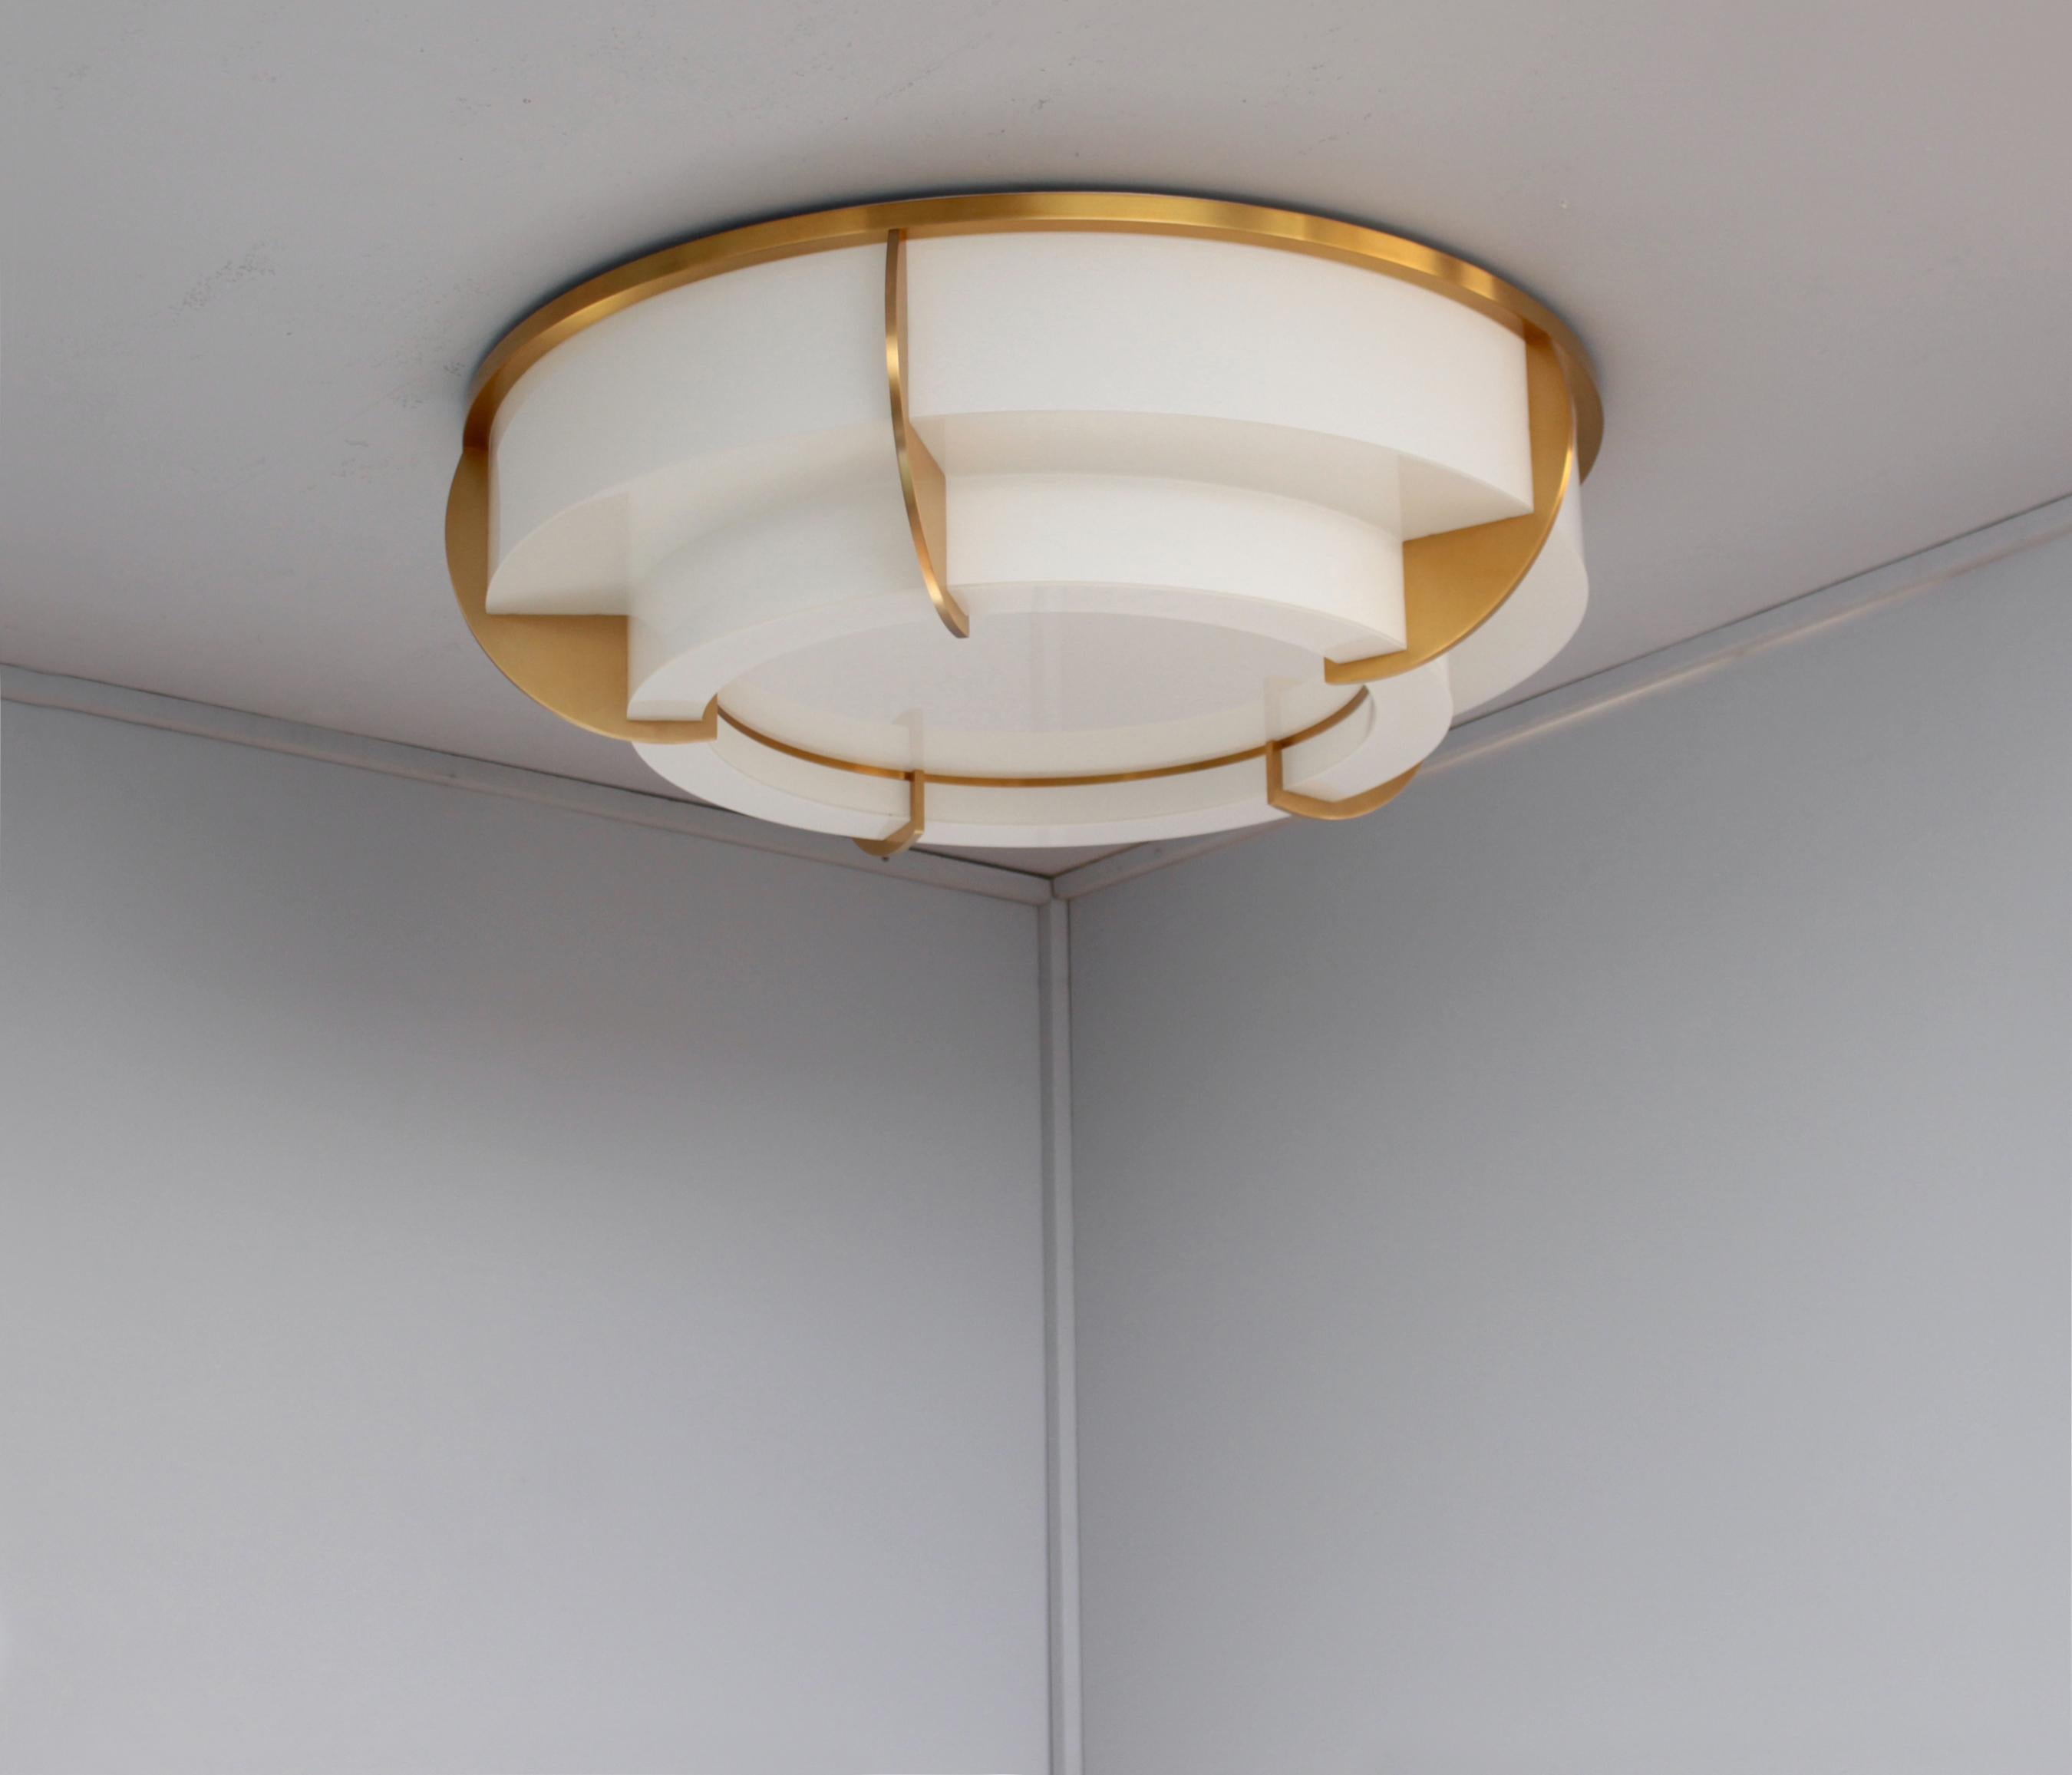 Atelier Jean Perzel - A fine French Art Deco two-tiered round ceiling fixture with a gilded lacquered crown-shaped bronze frame which supports the bent and flat enameled white glass diffusers. 
The flat bottom diffuser removes easily in order to